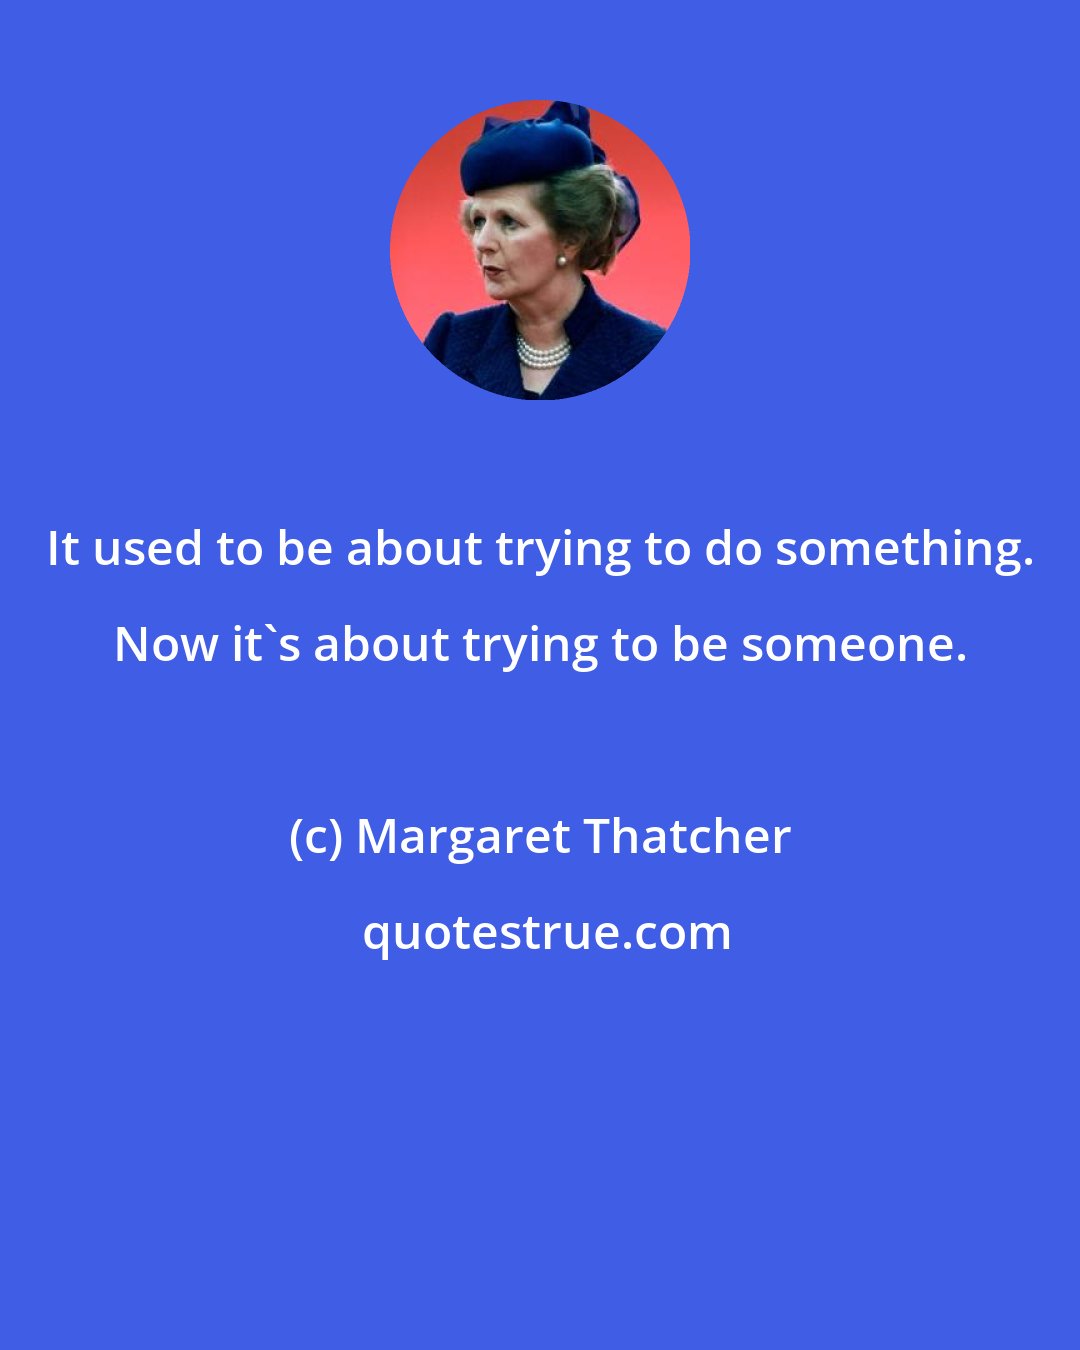 Margaret Thatcher: It used to be about trying to do something. Now it's about trying to be someone.